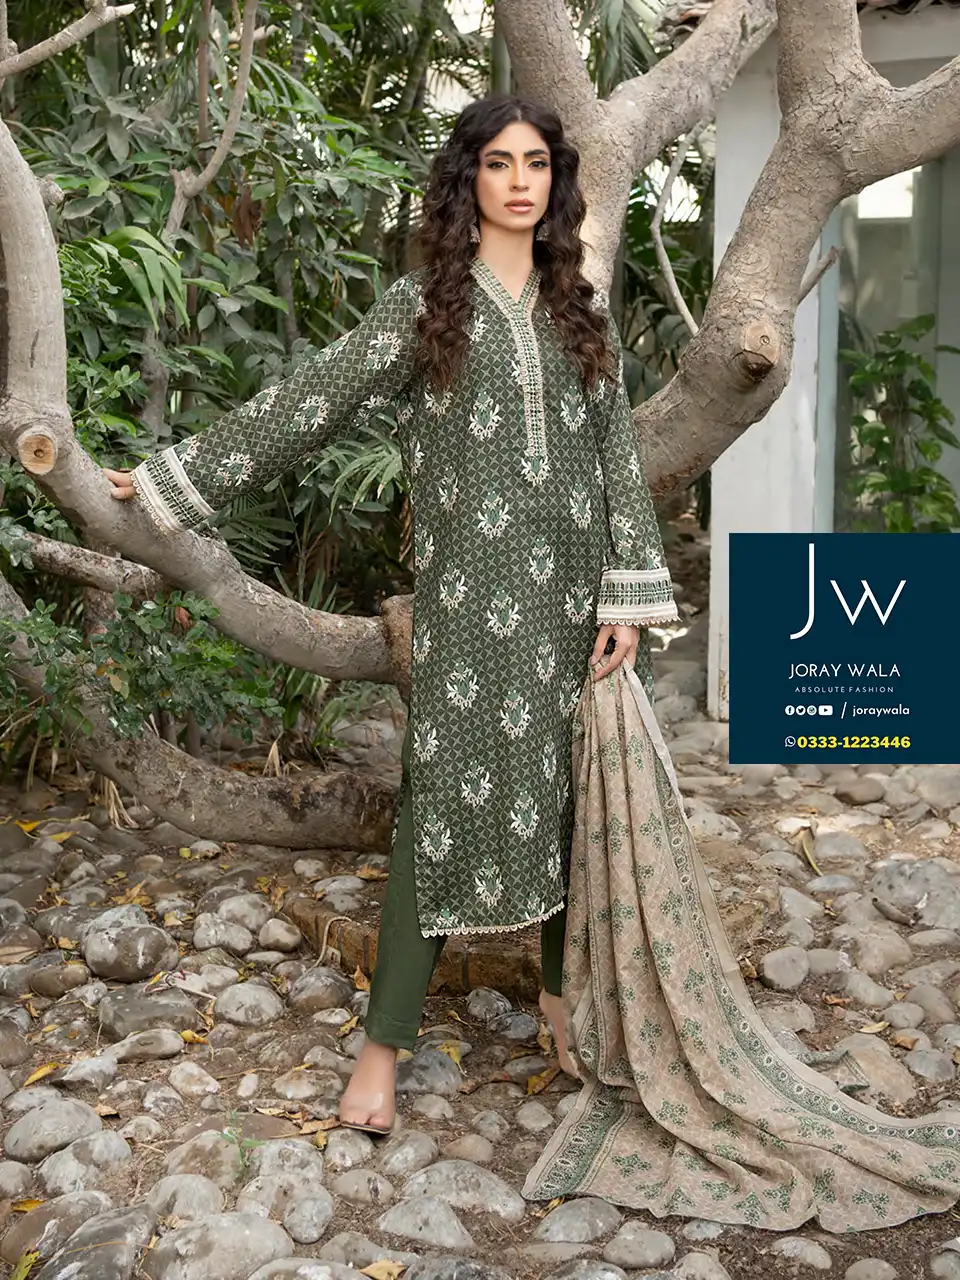 Zesh Summer Printed Lawn 2024 D1 available with free delivery at joraywala. 100% Original.